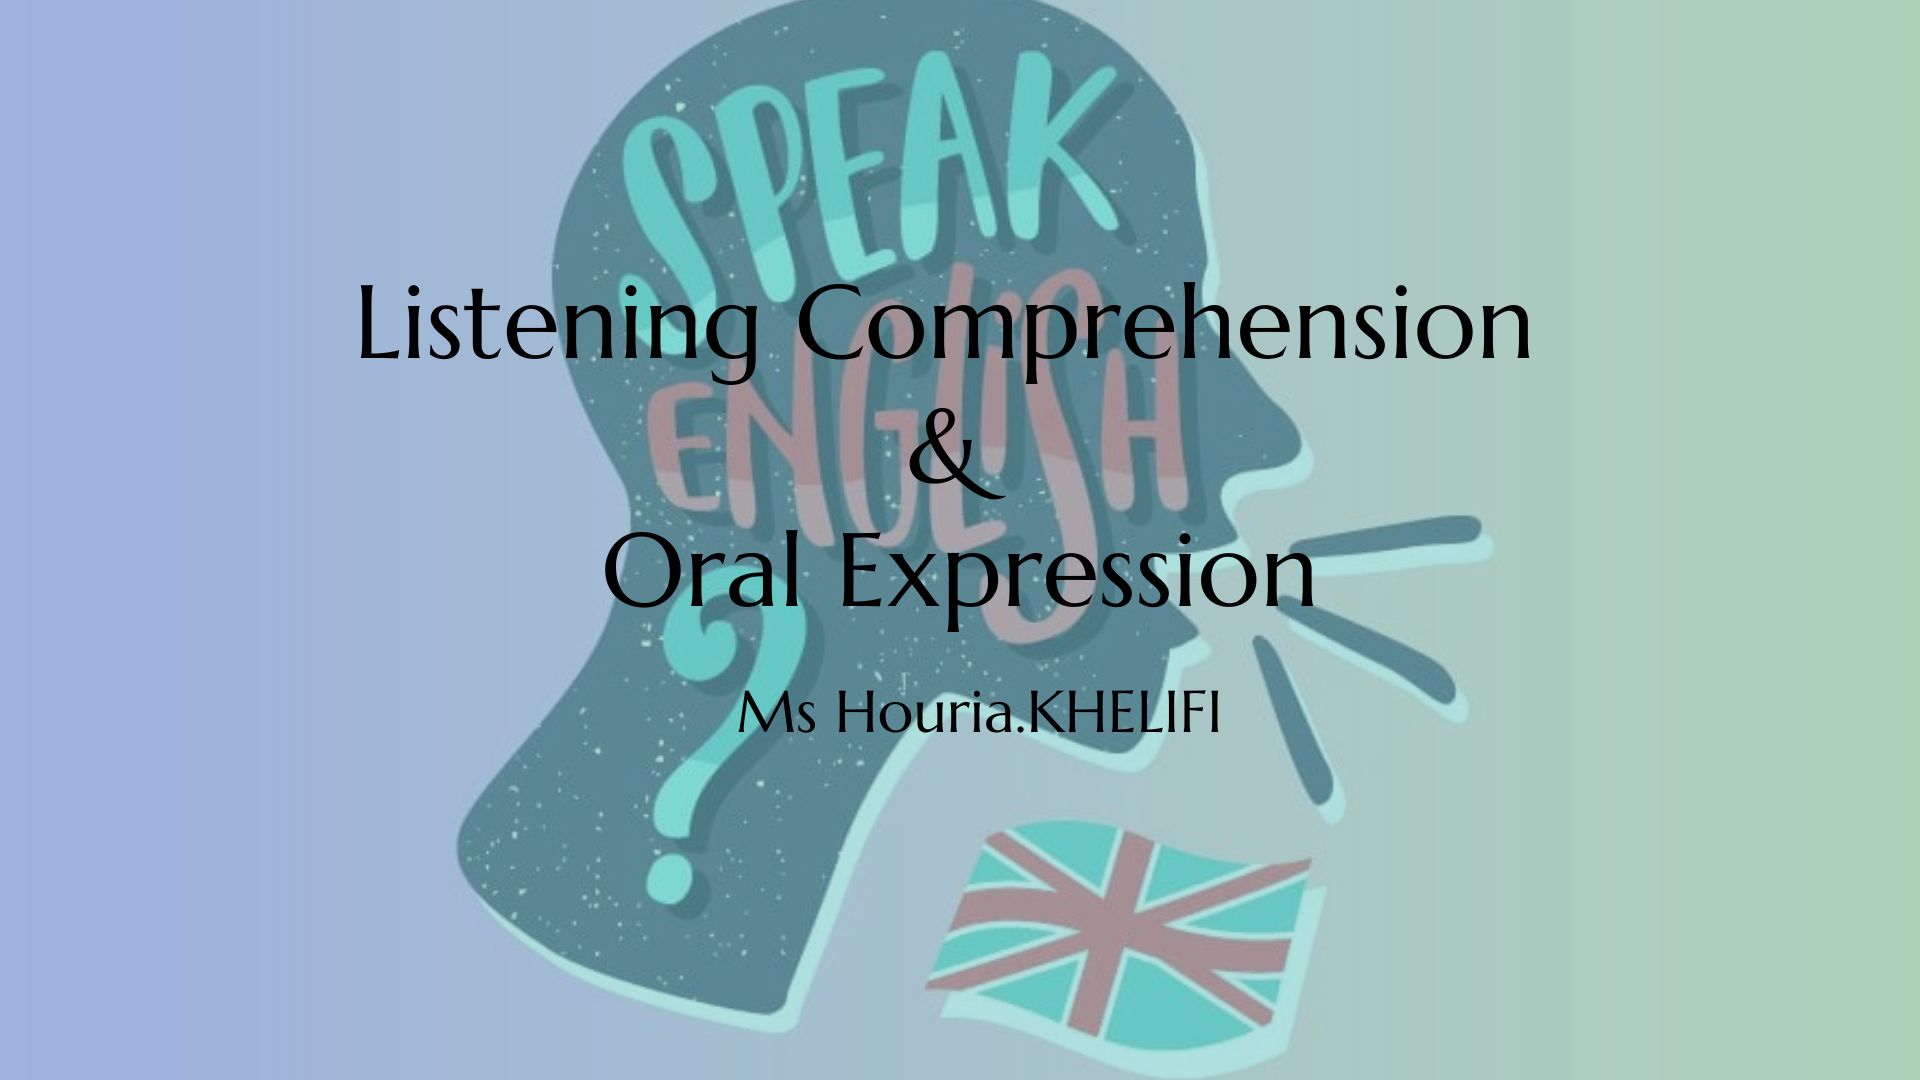 ORAL EXPRESSION